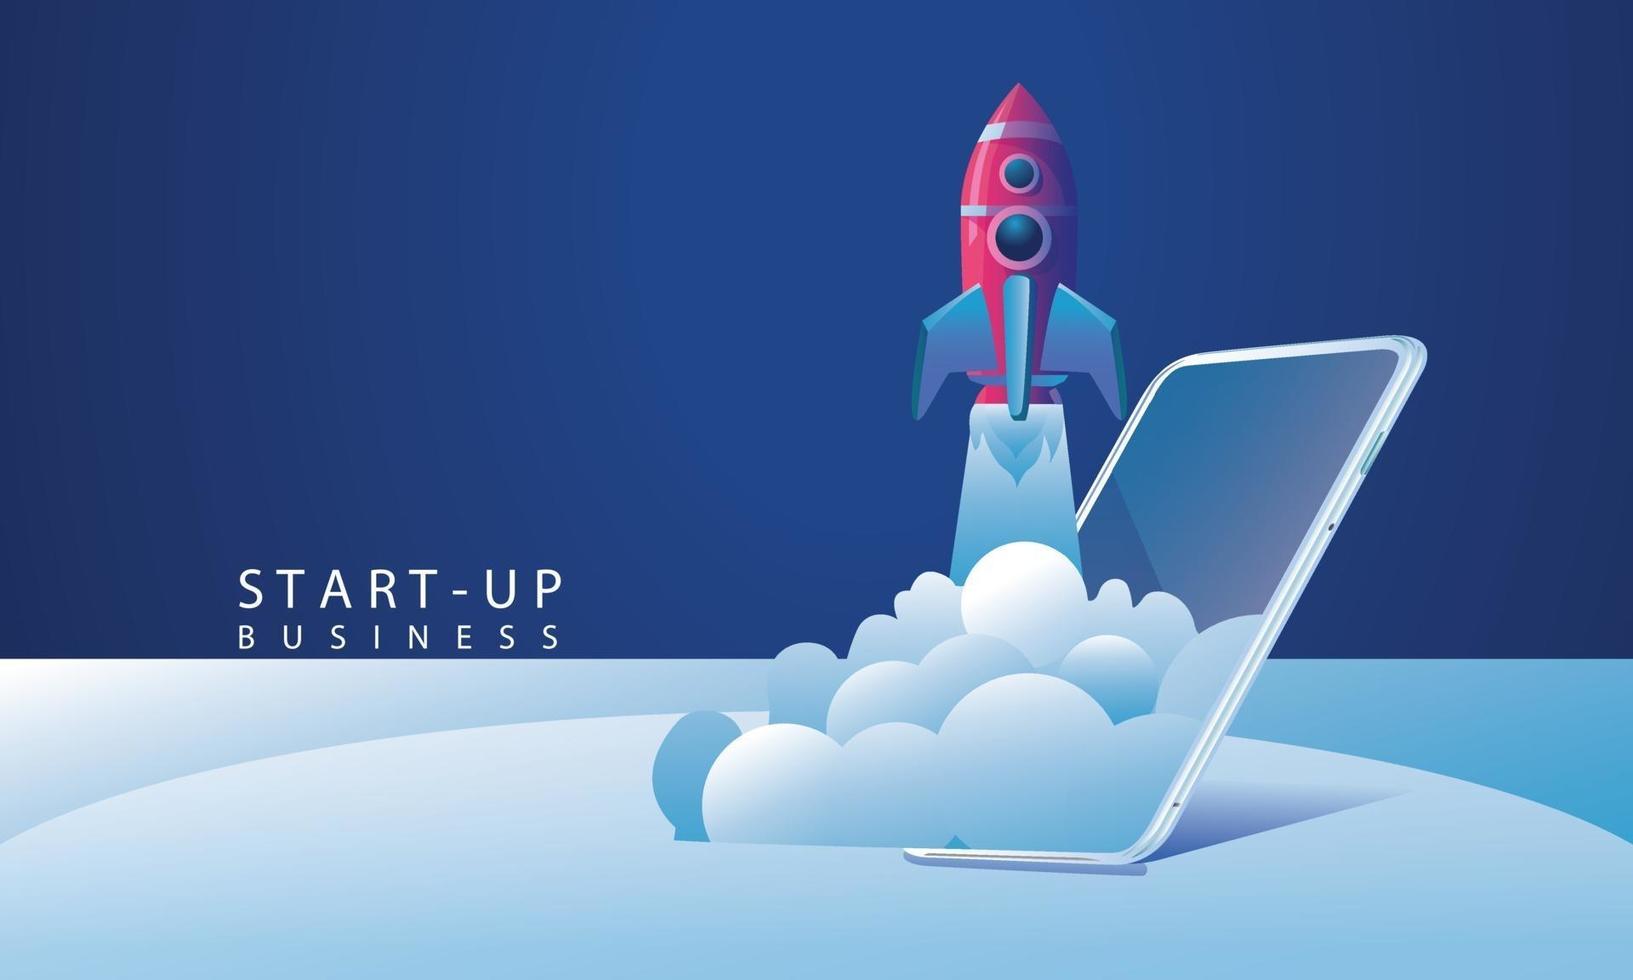 Business Startup launching product with rocket concept. Template and Backgrounds Vector illustration, business project startup process idea through planning and strategy, time management